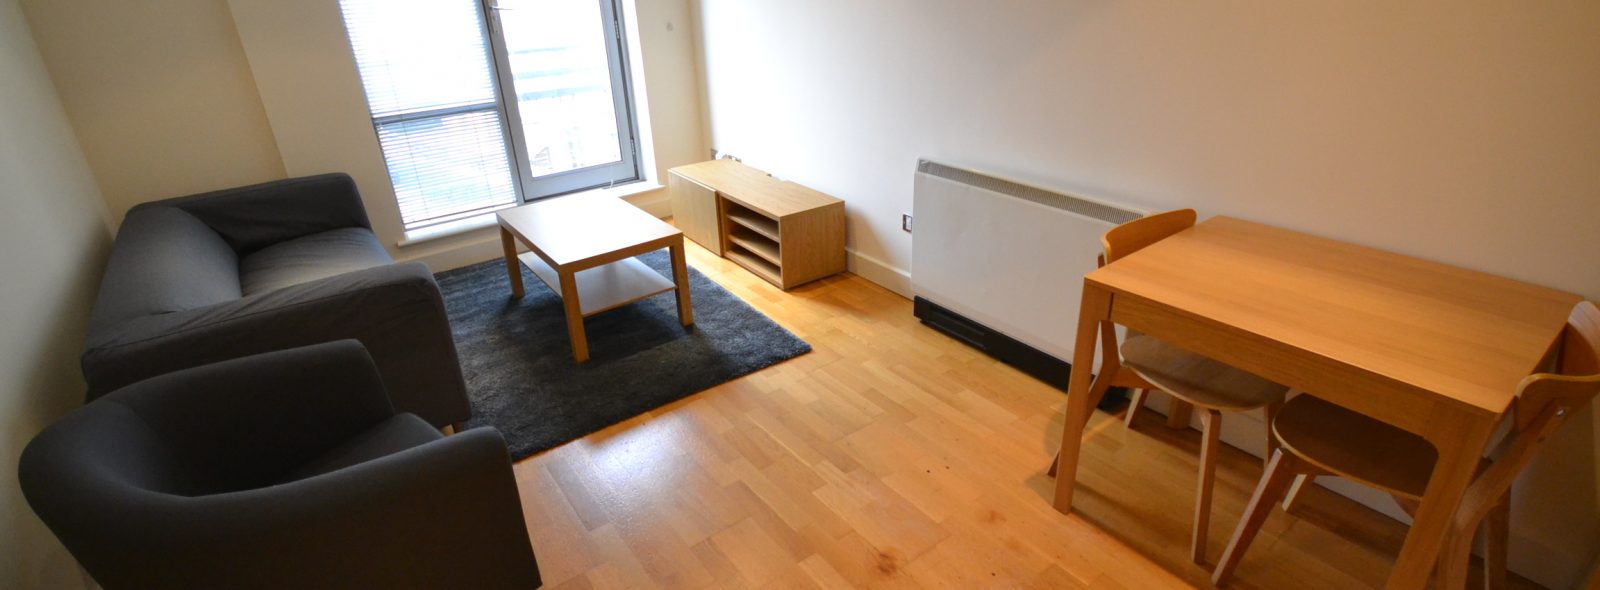 2-Bed Student Apartment – Ropewalk Court, Upper College Street